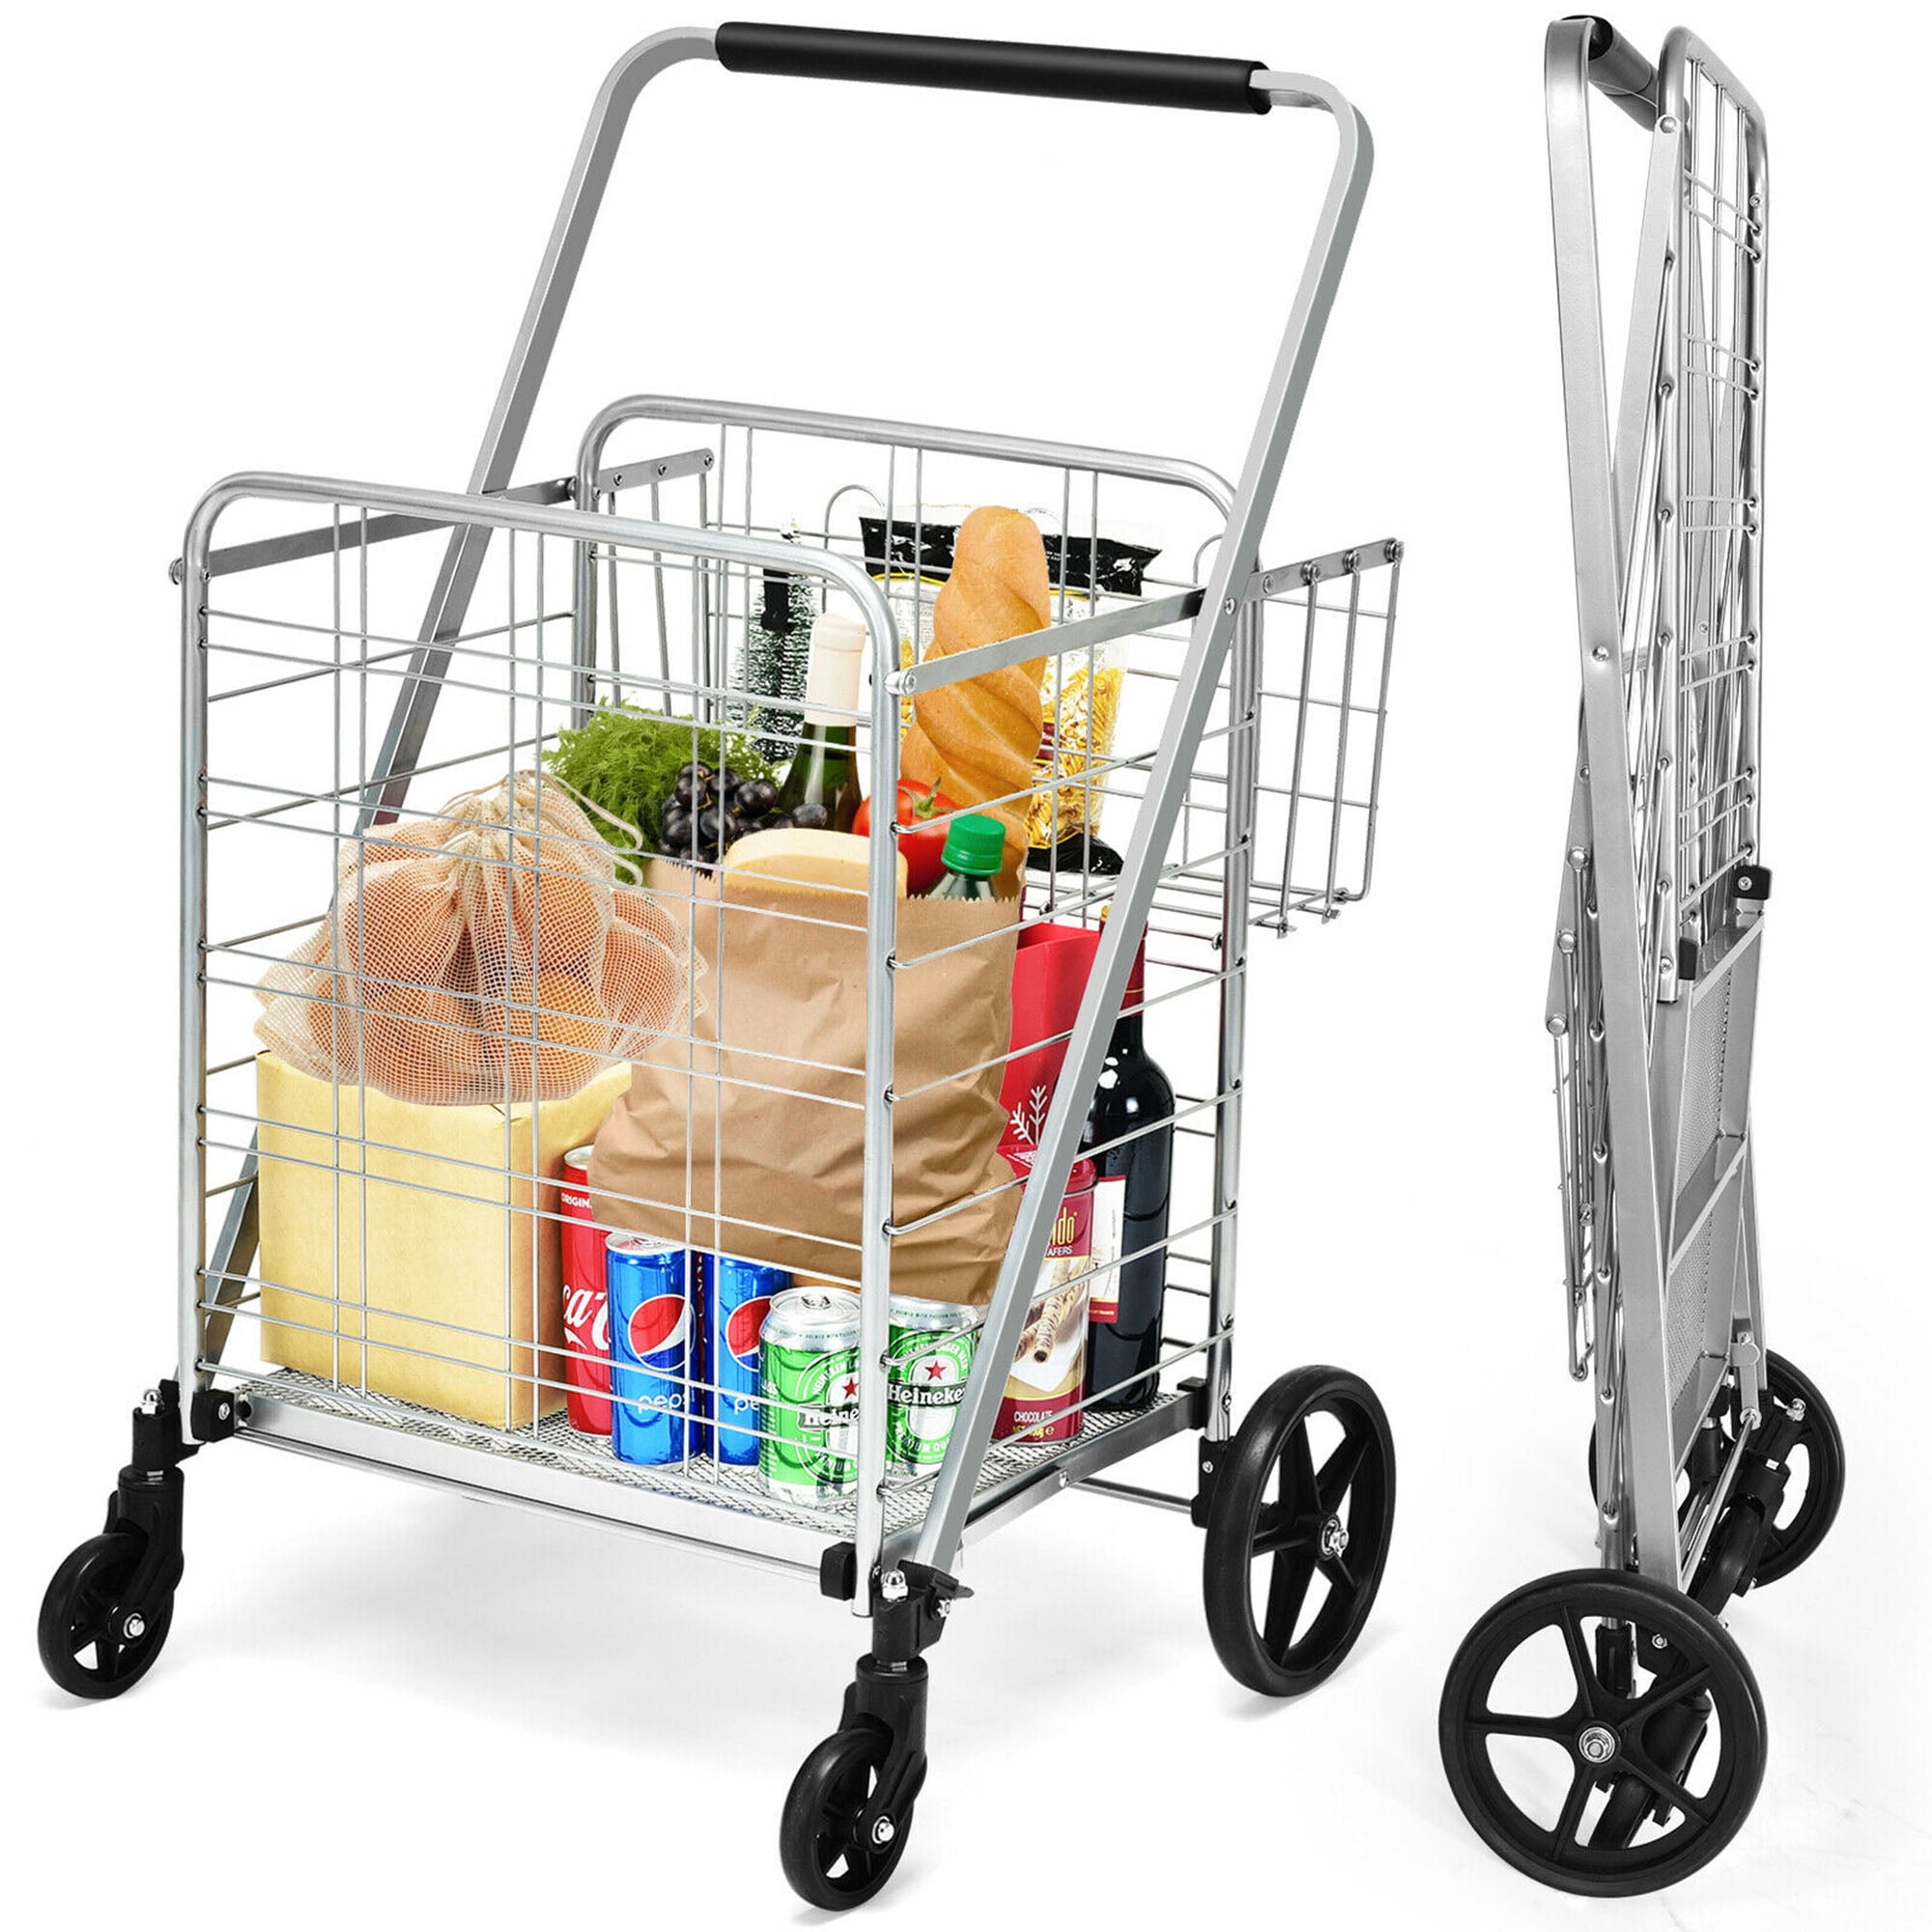 LS Jumbo Deluxe Folding Shopping Cart with Dual Swivel Wheels and 